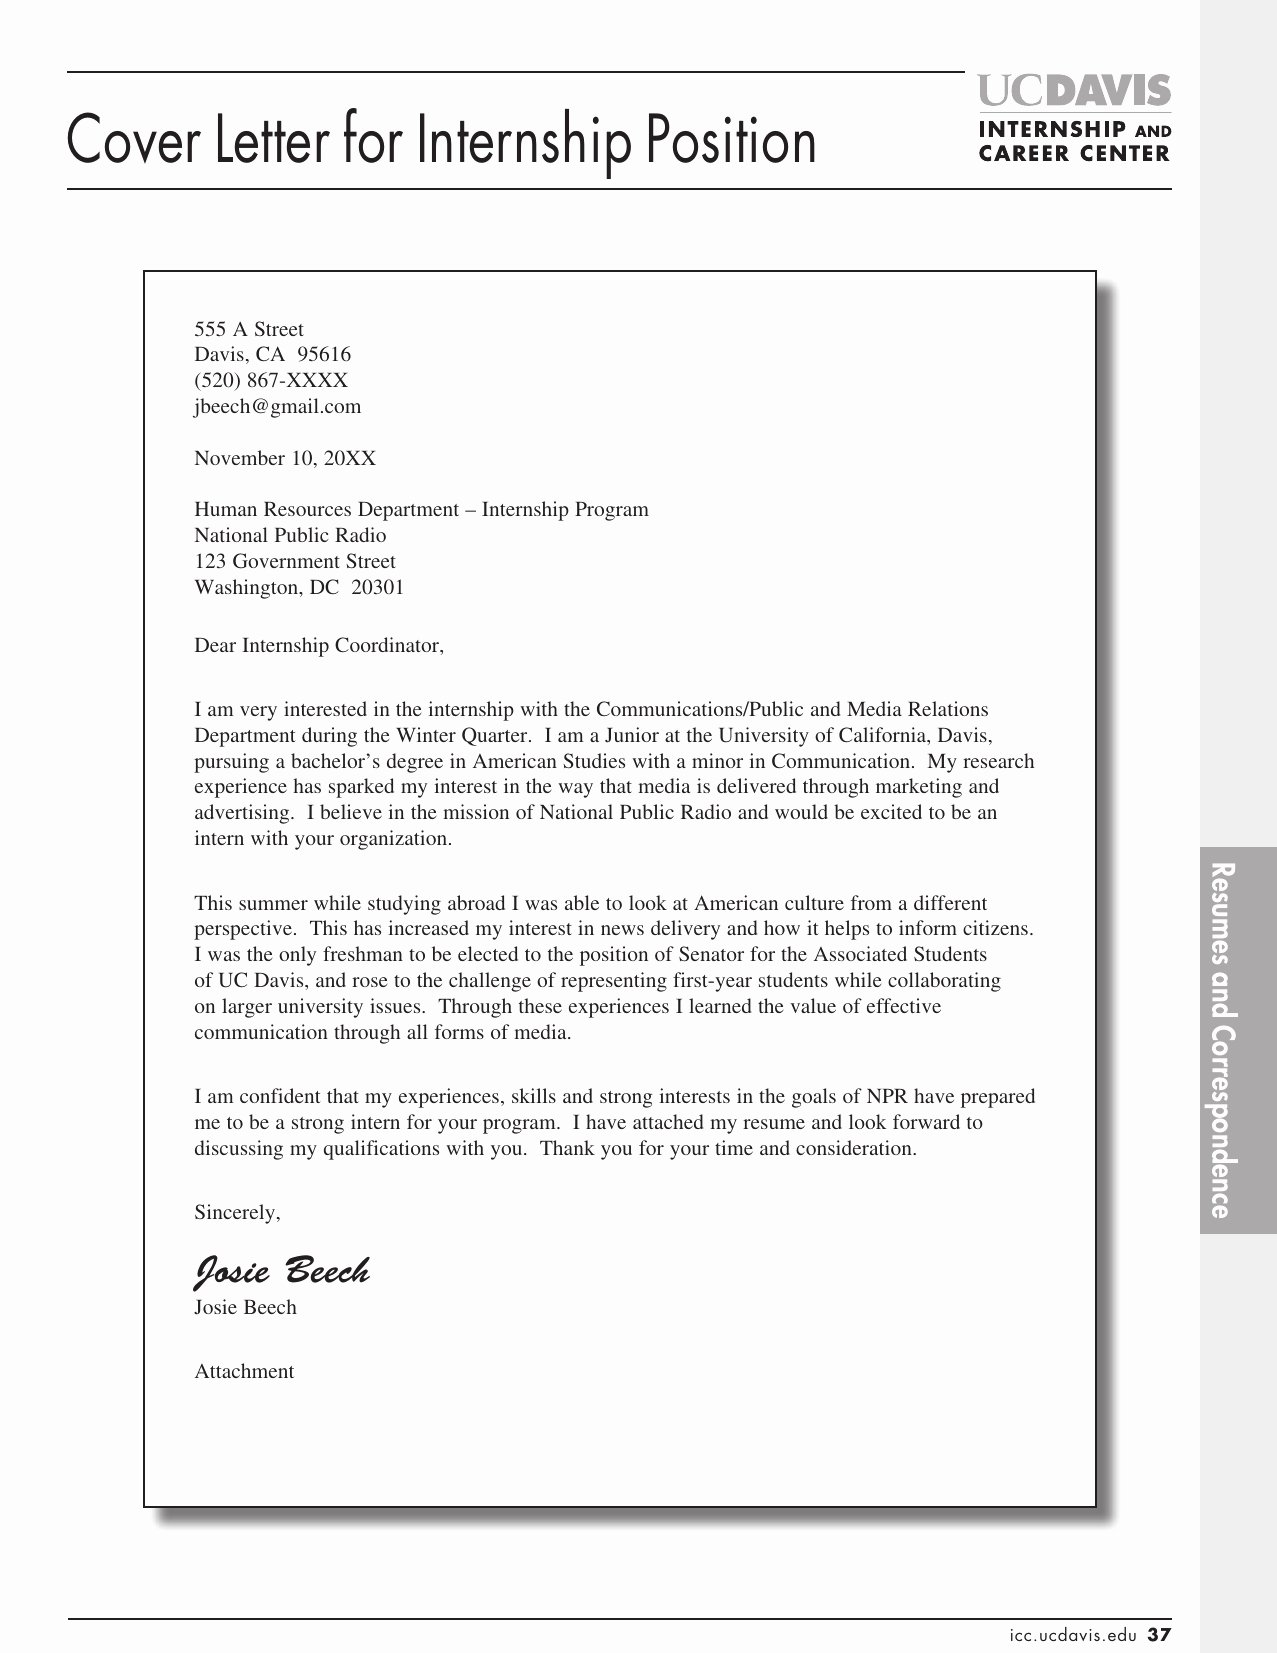 Best Cover Letter for Job New Cover Letter Samples Download Free Cover Letter Templates